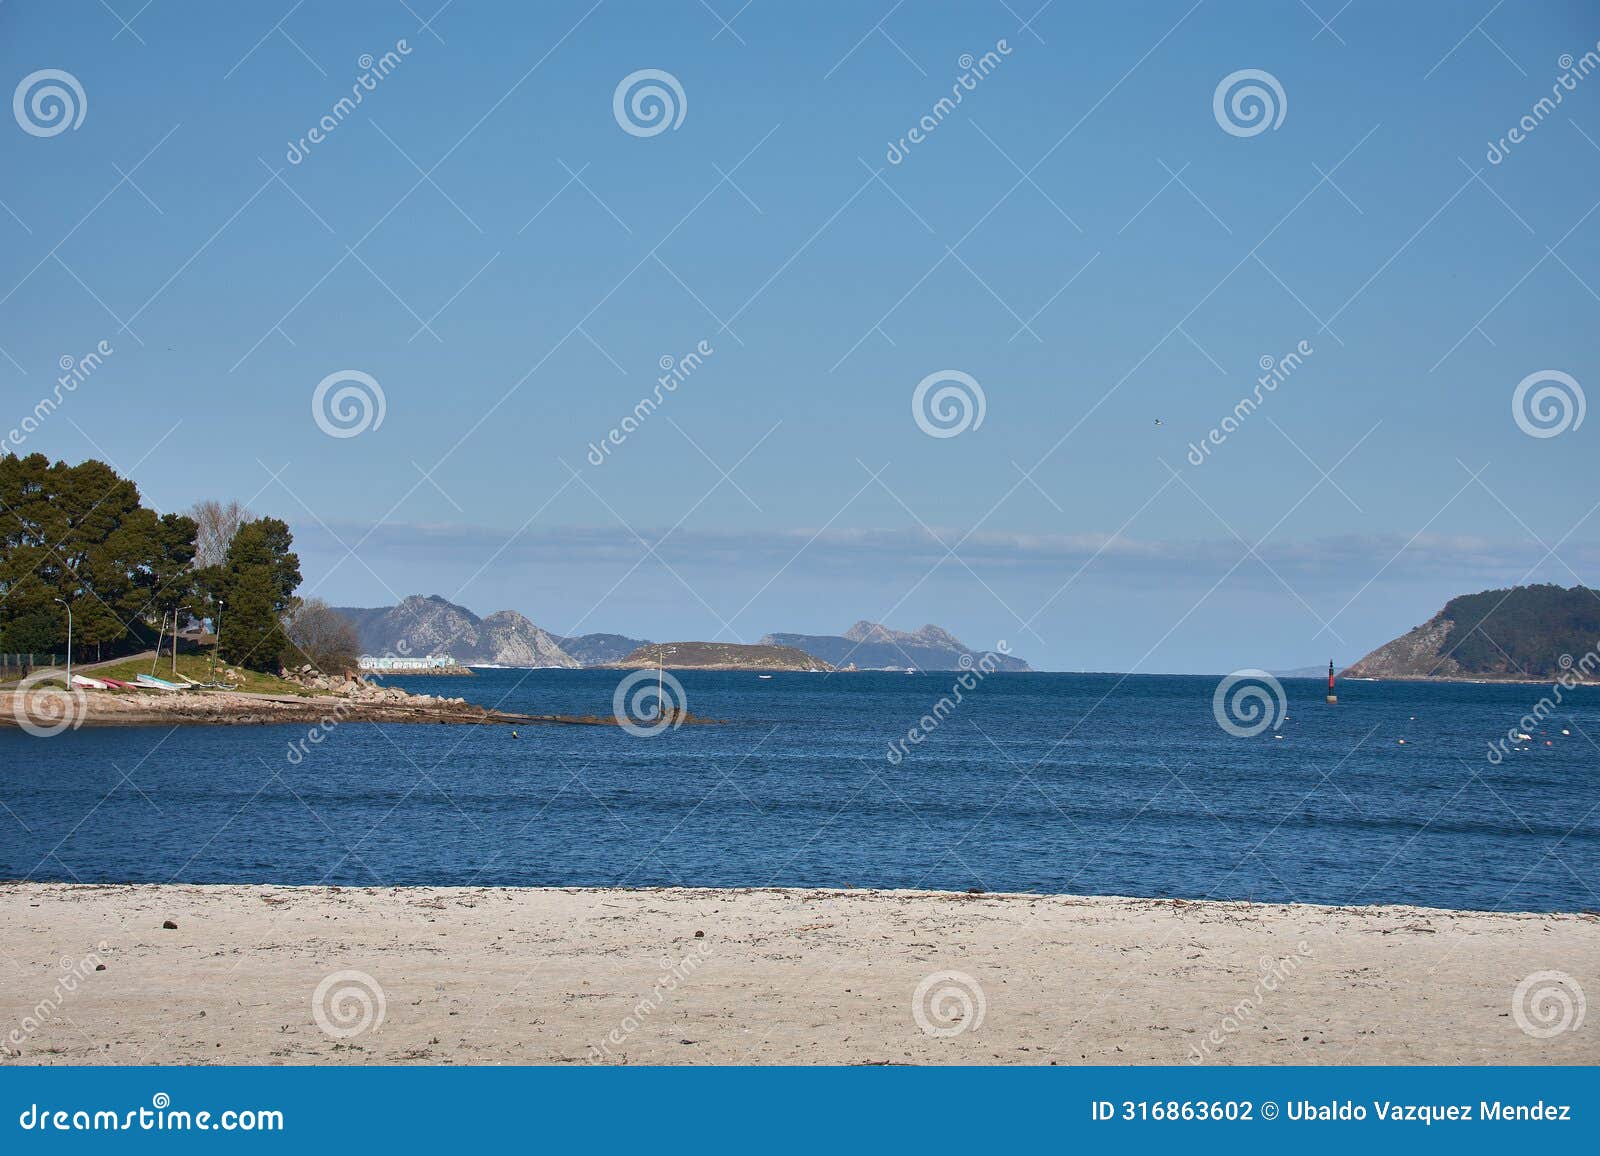 view of the cies islands from sabaris beach in baiona